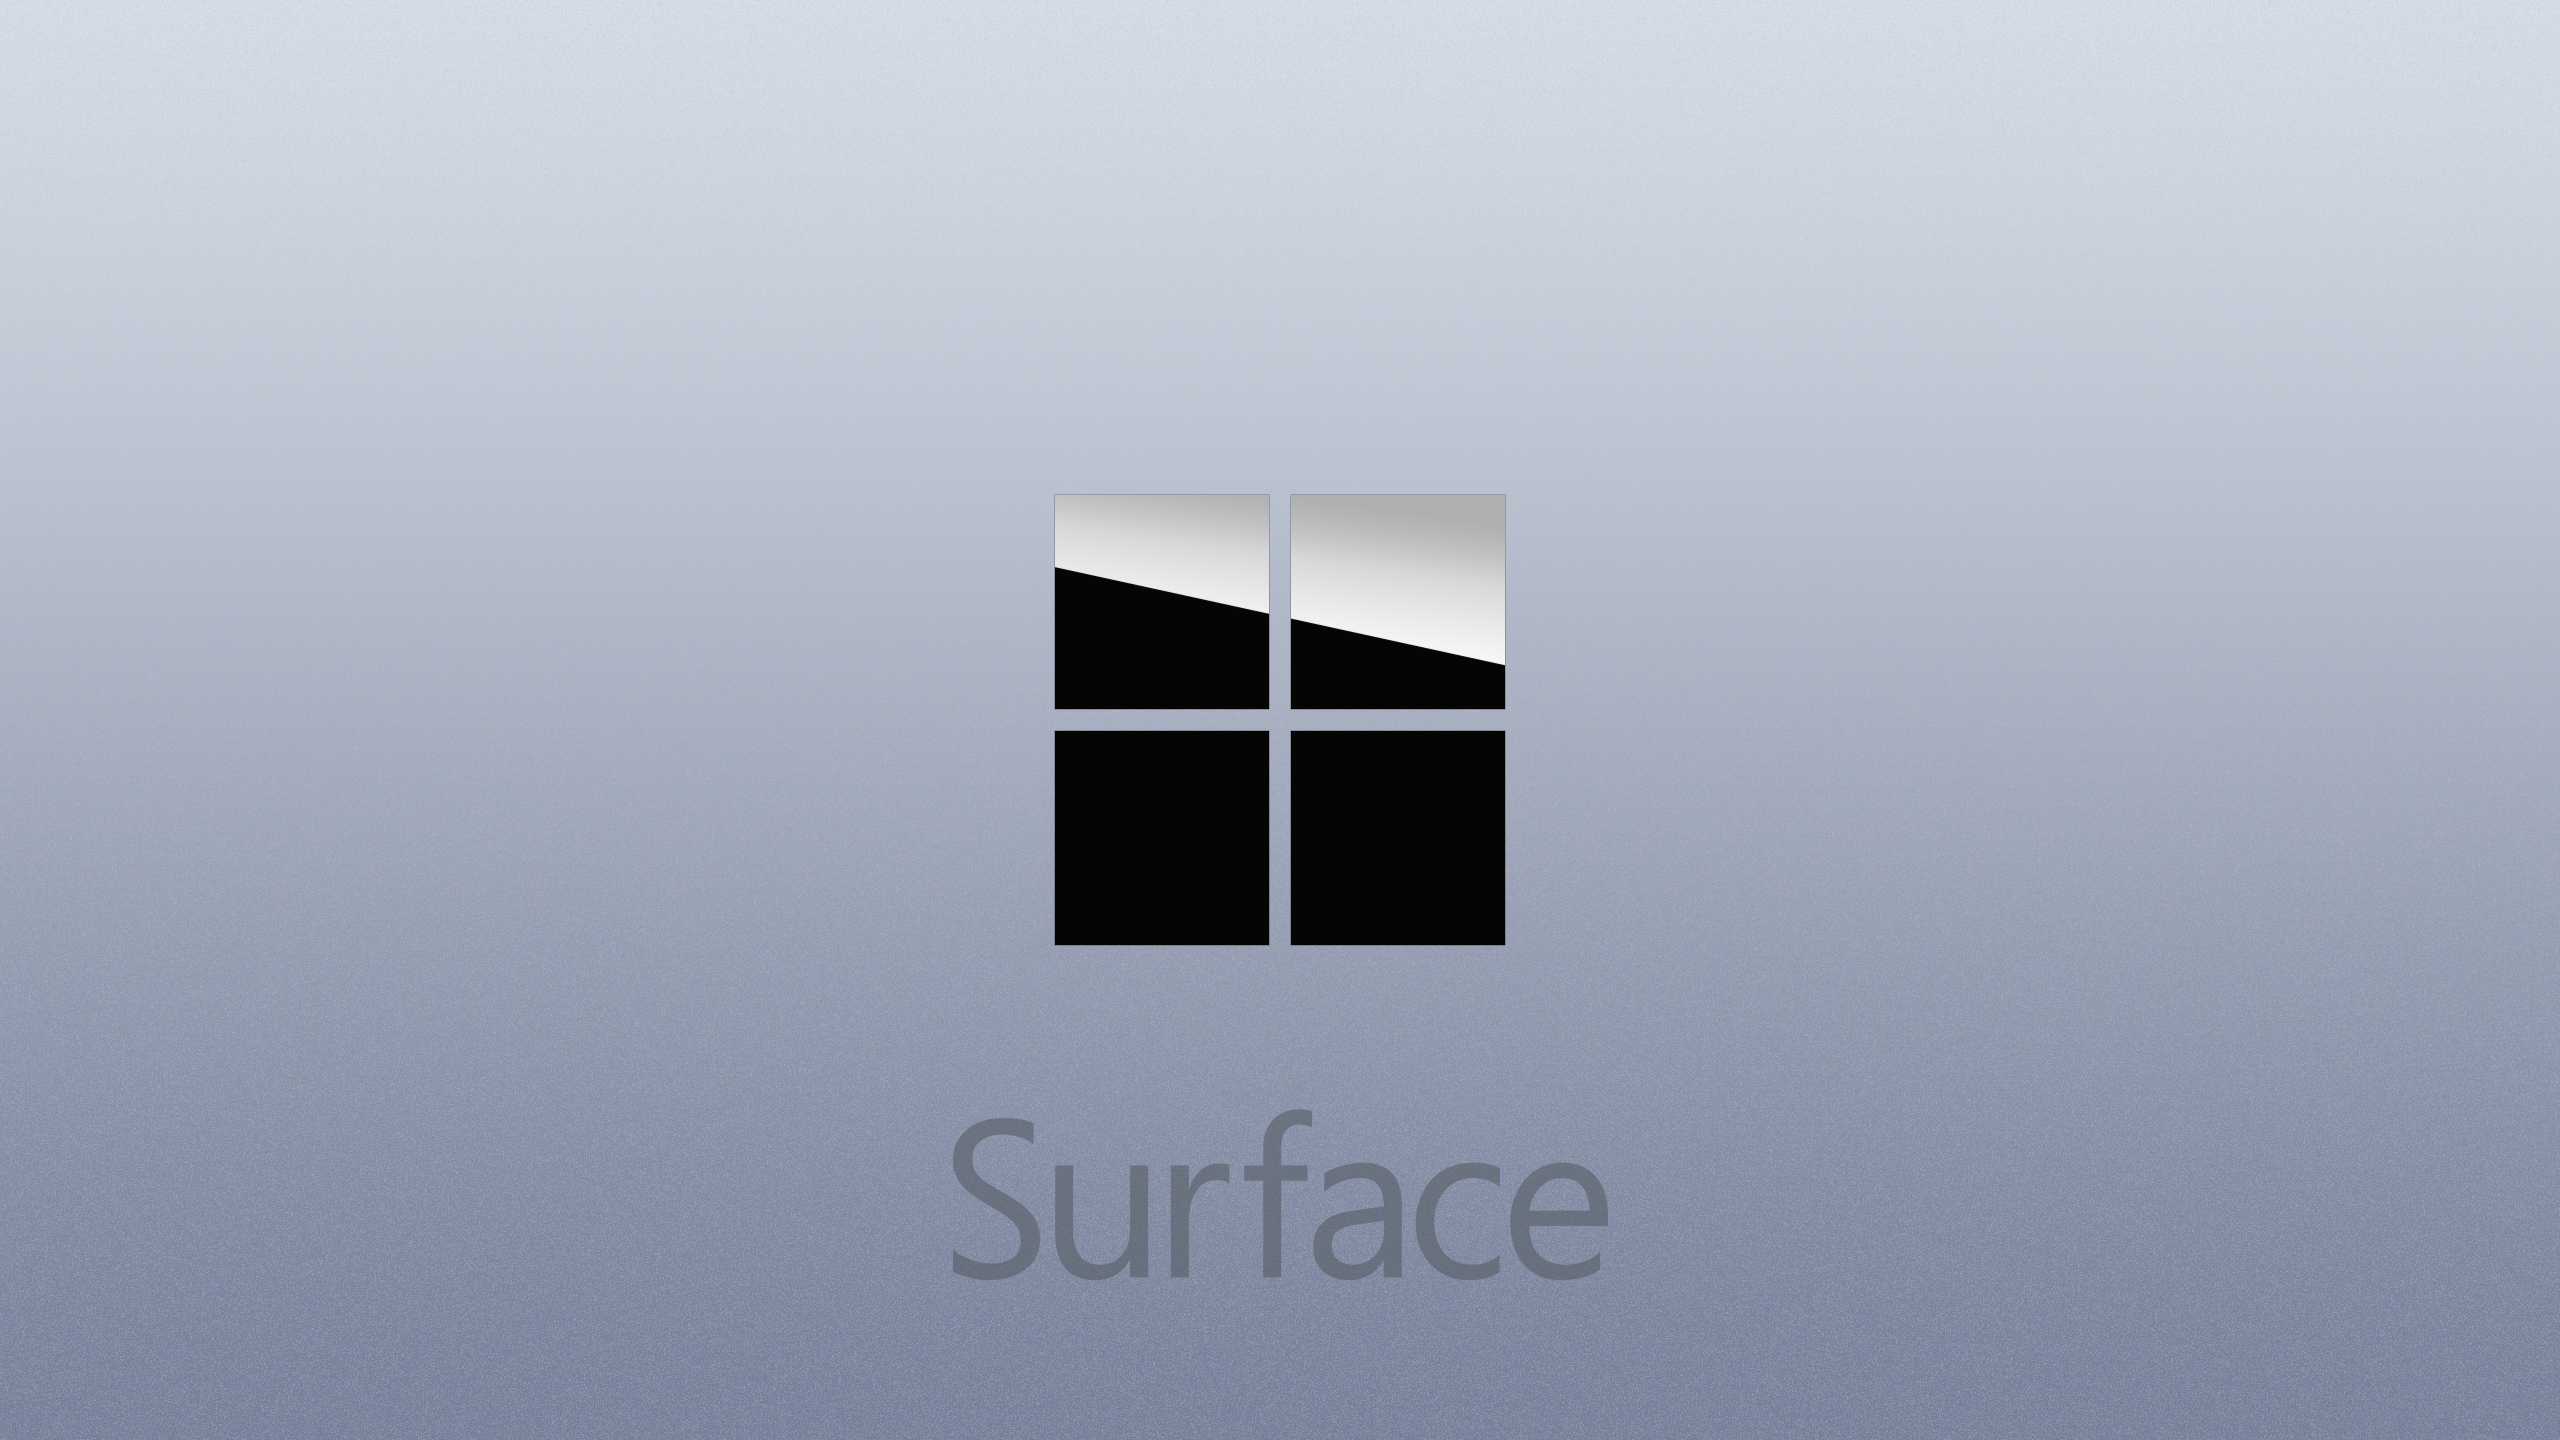 Microsoft Surface Wallpapers